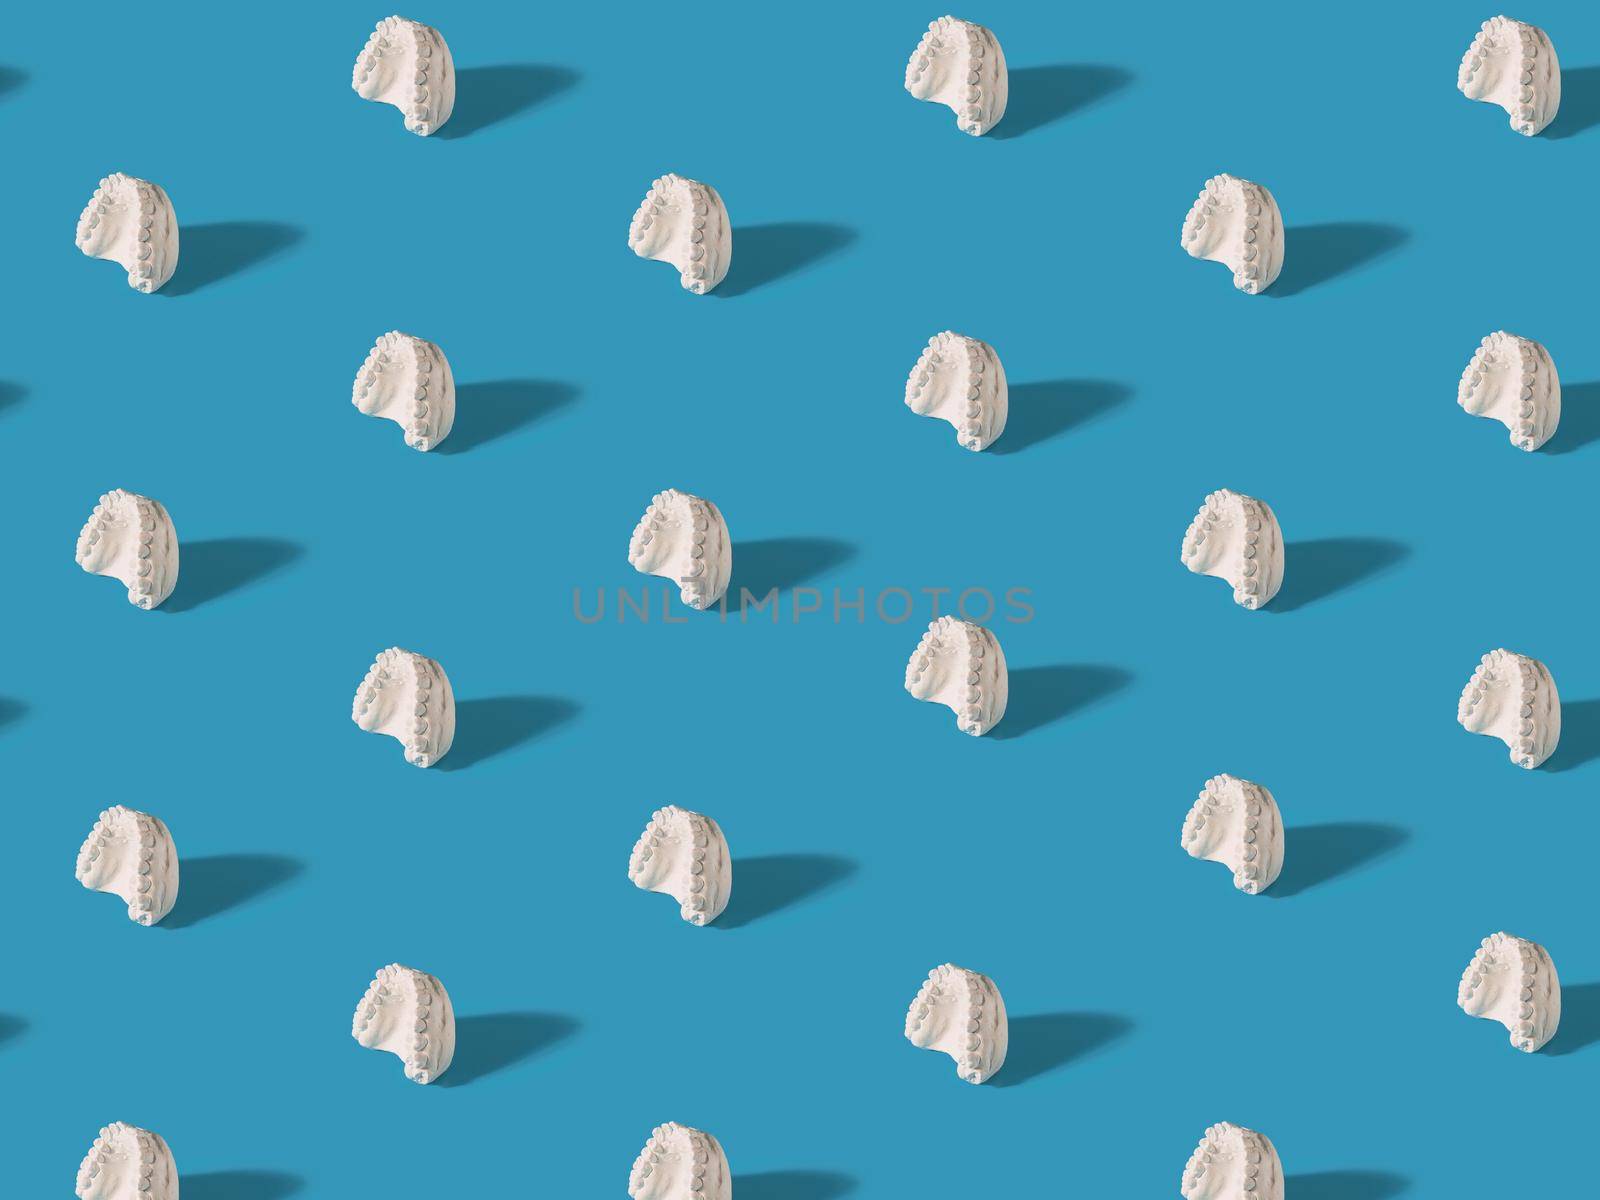 Minimal concept.Trendy braces pattern made with various braces on bright light blue background.